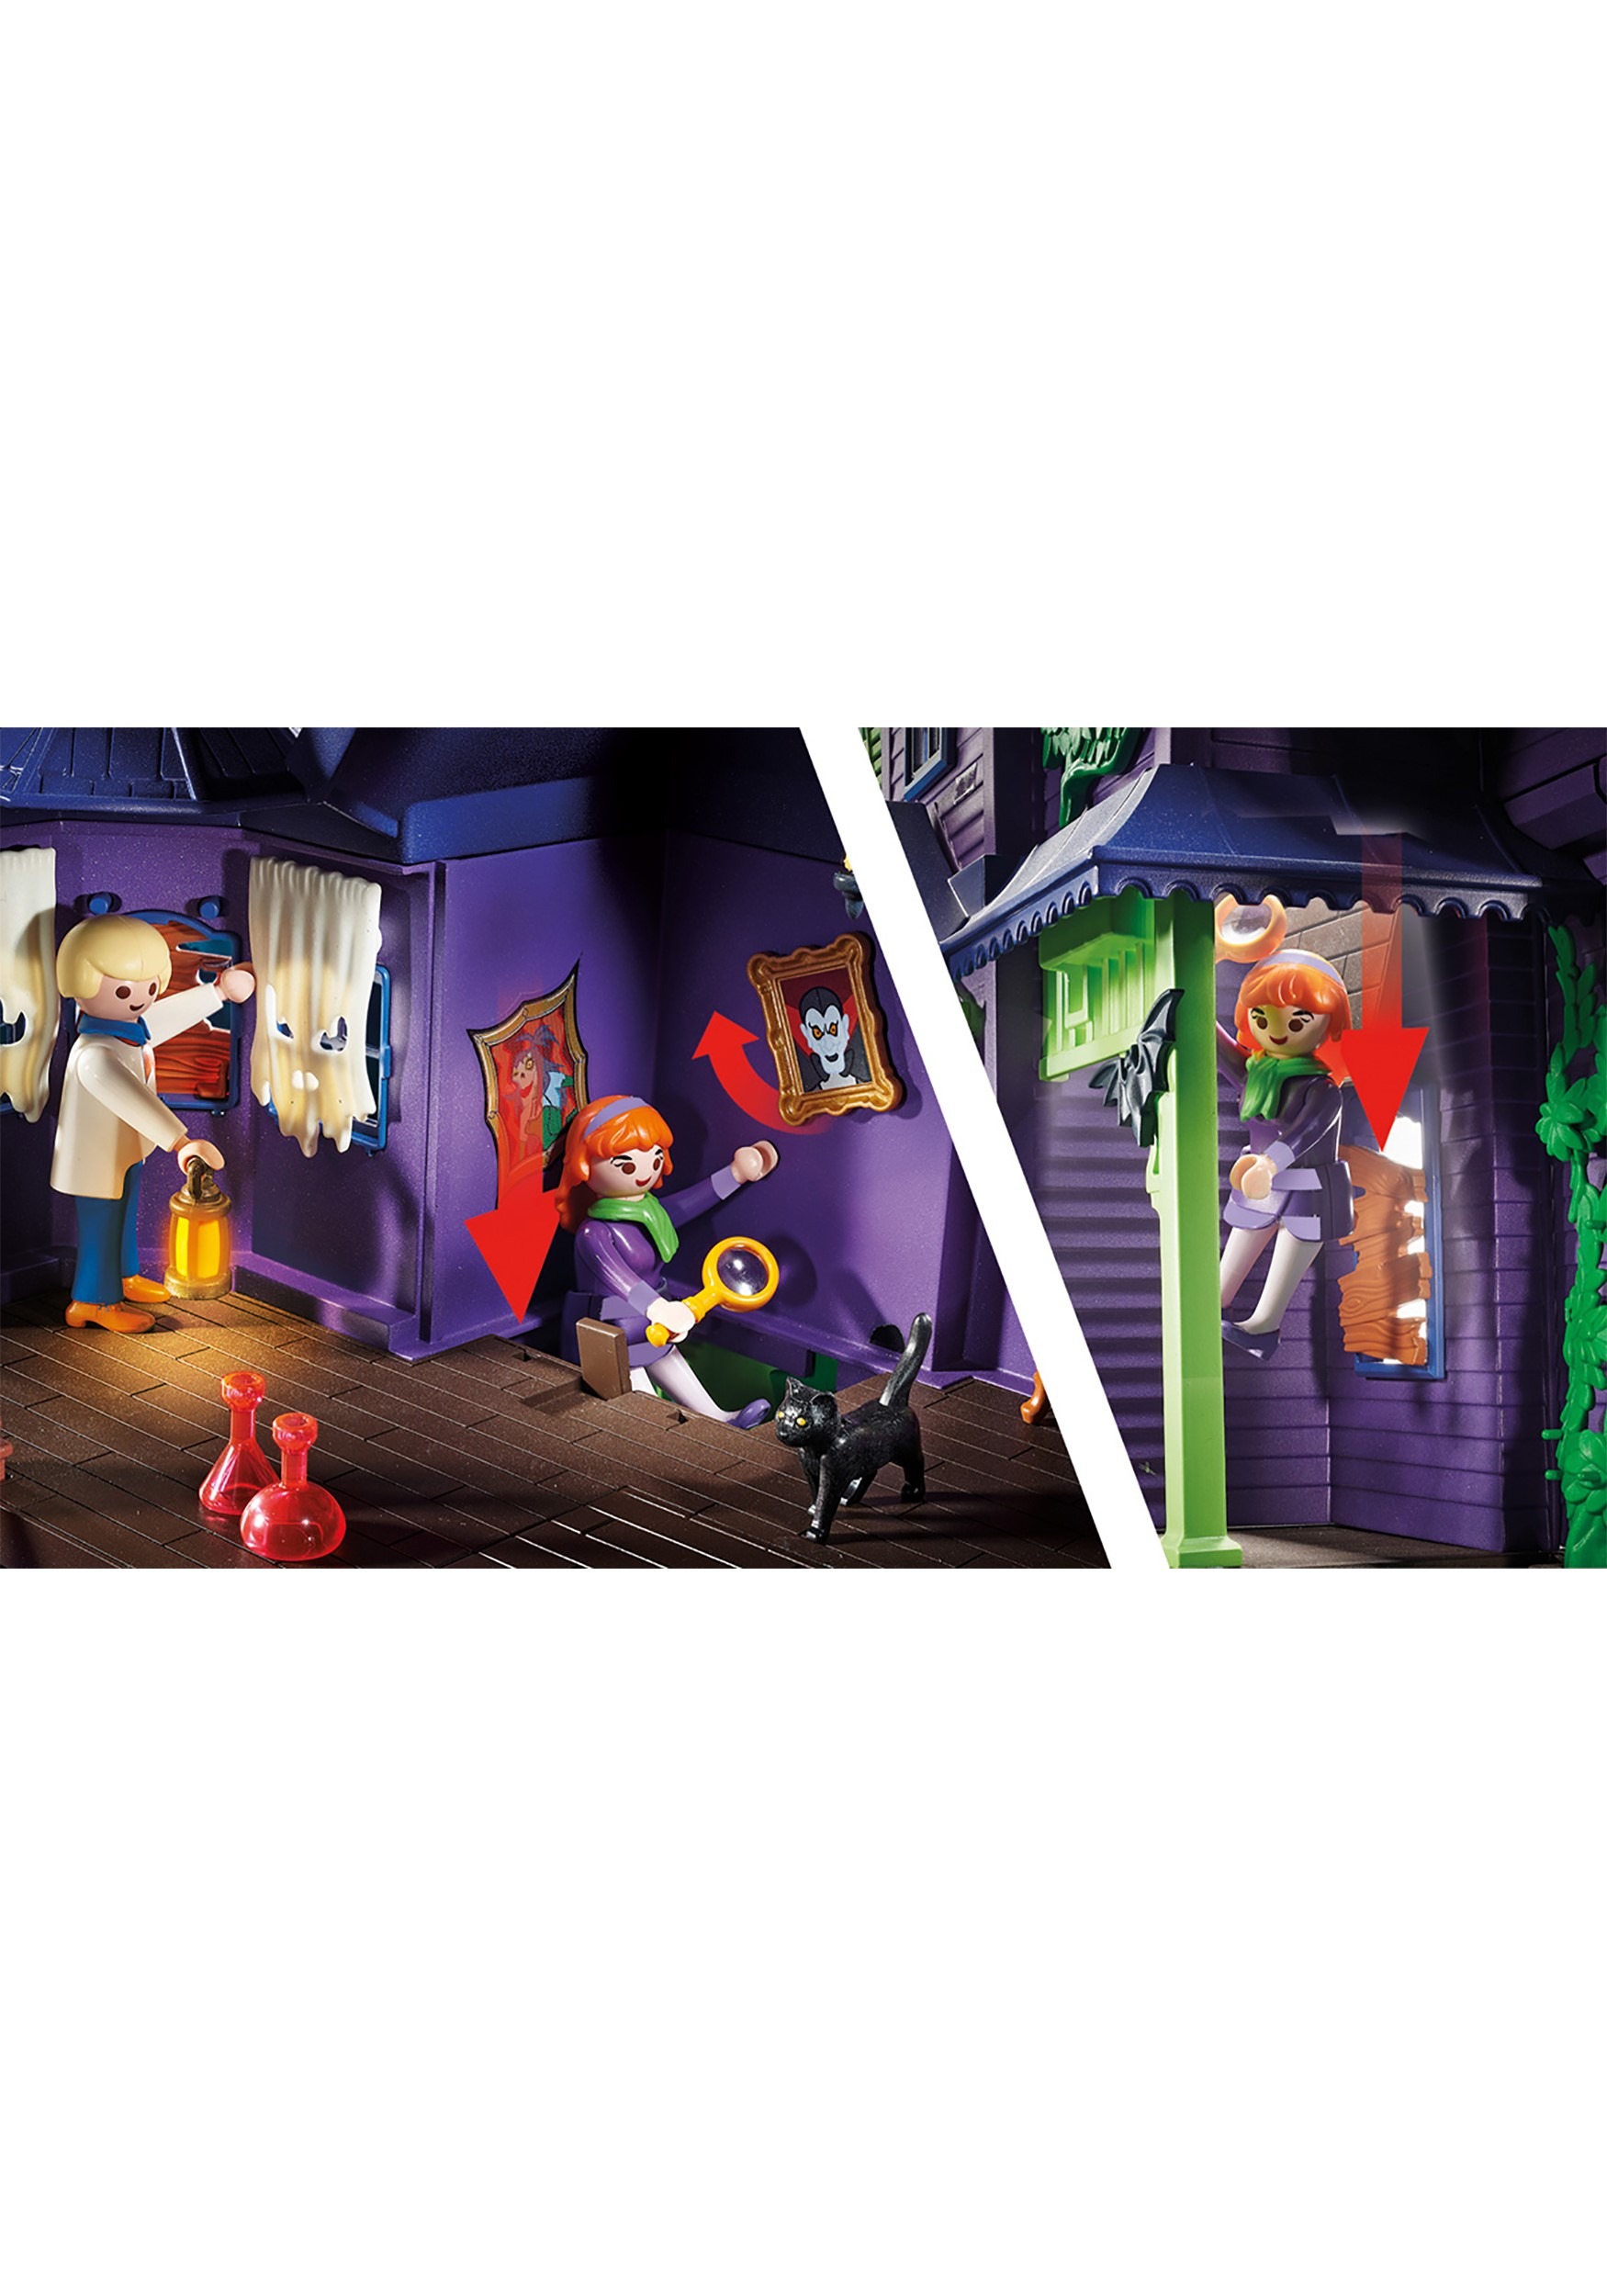 Scooby Doo PLAYMOBIL Mystery Haunted Mansion Series 2 Sets Review